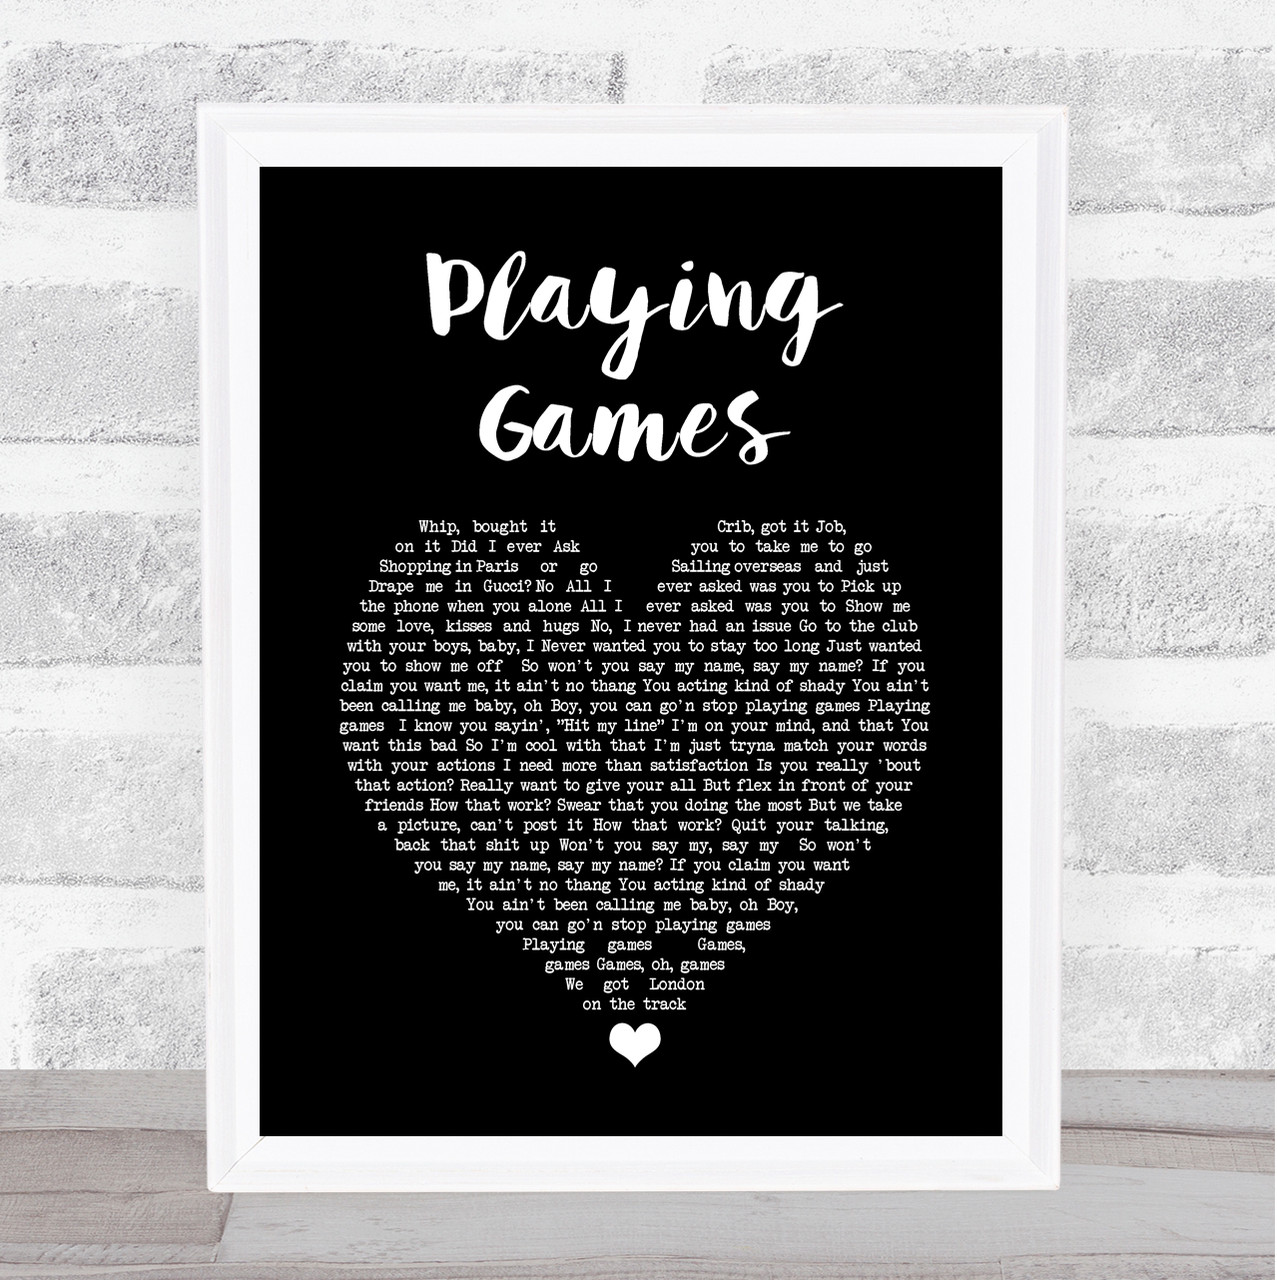 Quit Playing Games With My Heart' Poster